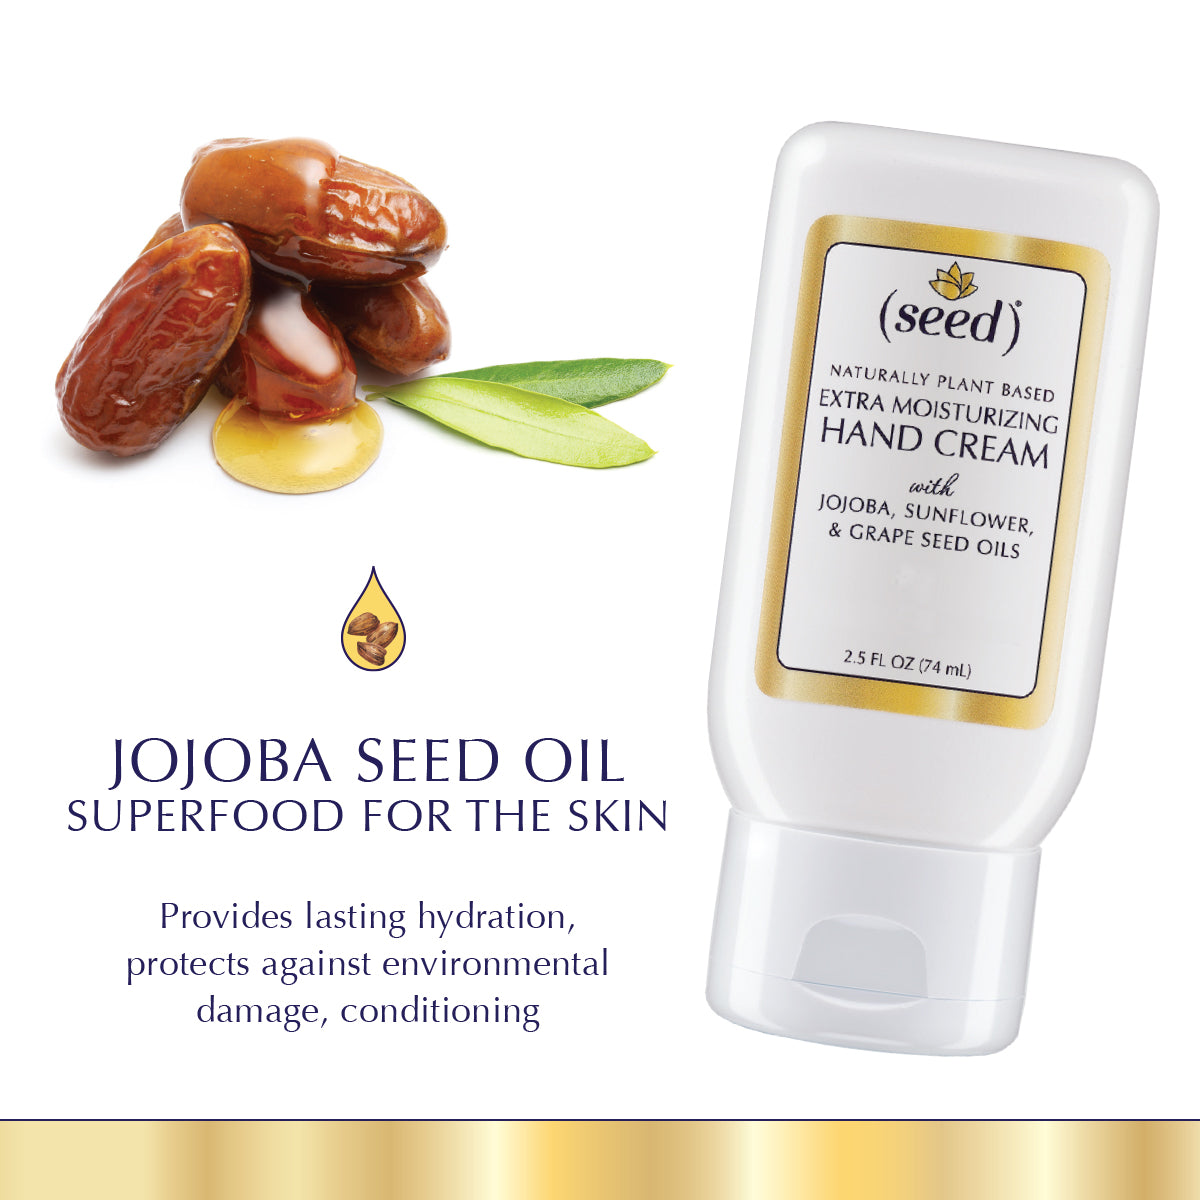 Seed Extra Moisturizing Hand Cream features jojoba seed oil, a superfood for your skin